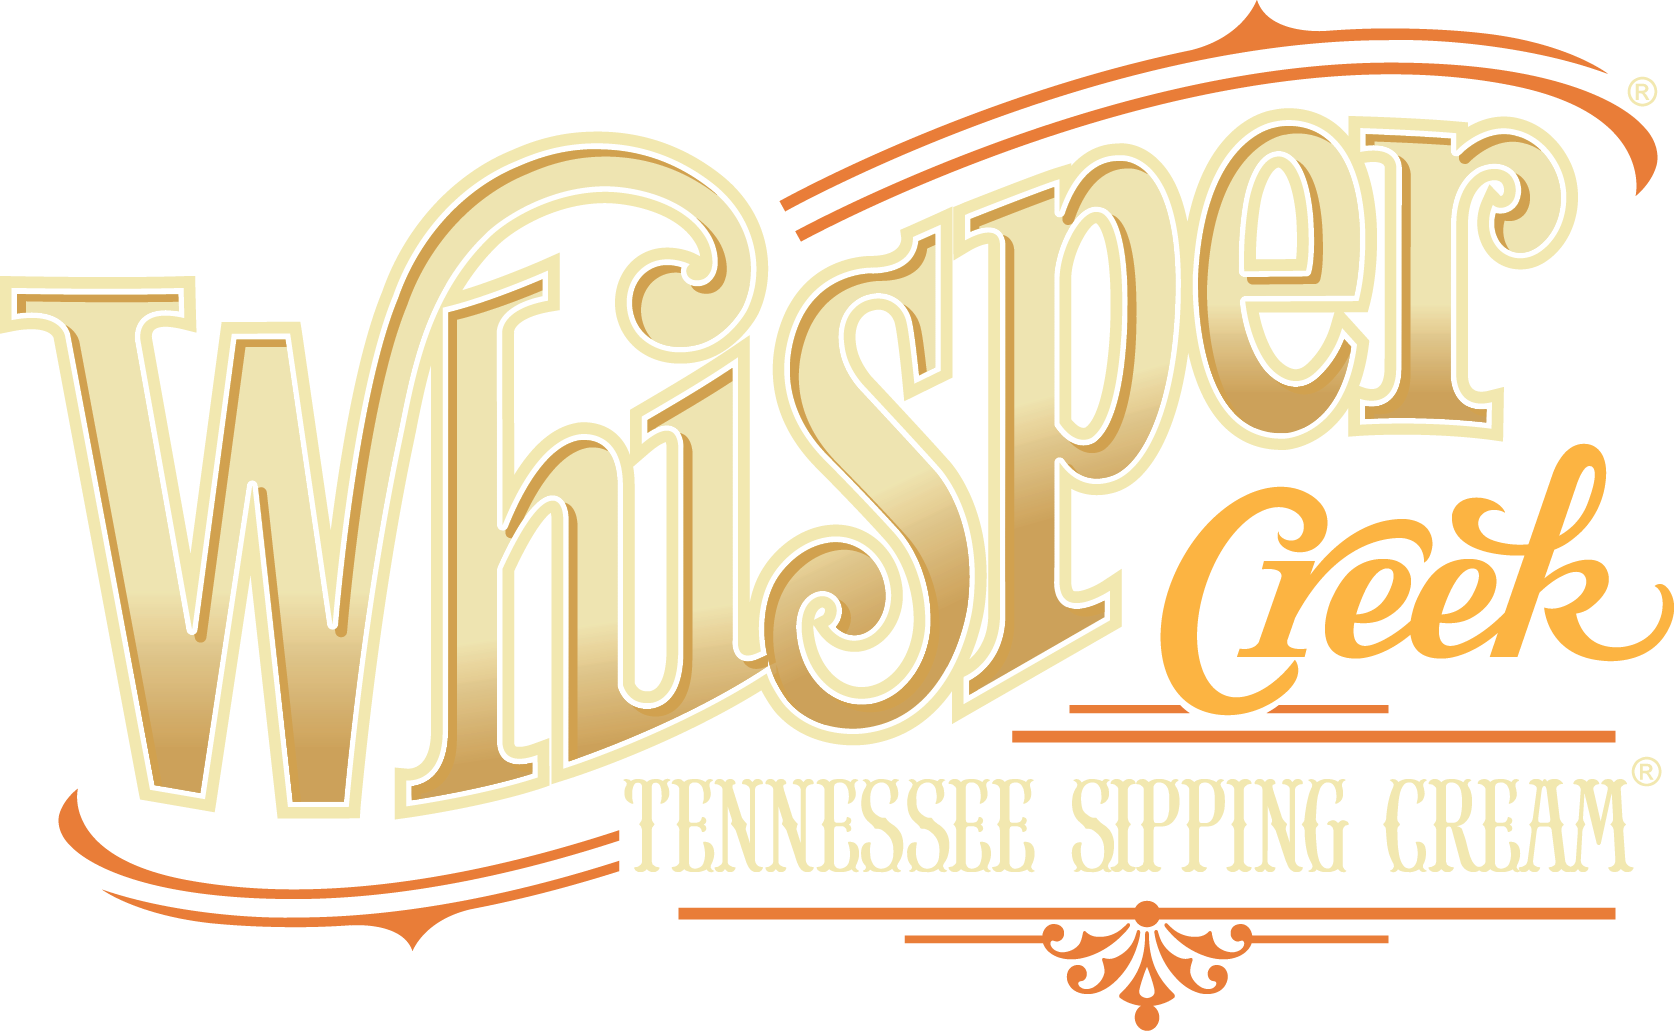 Whisper Creek® Tennessee Sipping Cream®